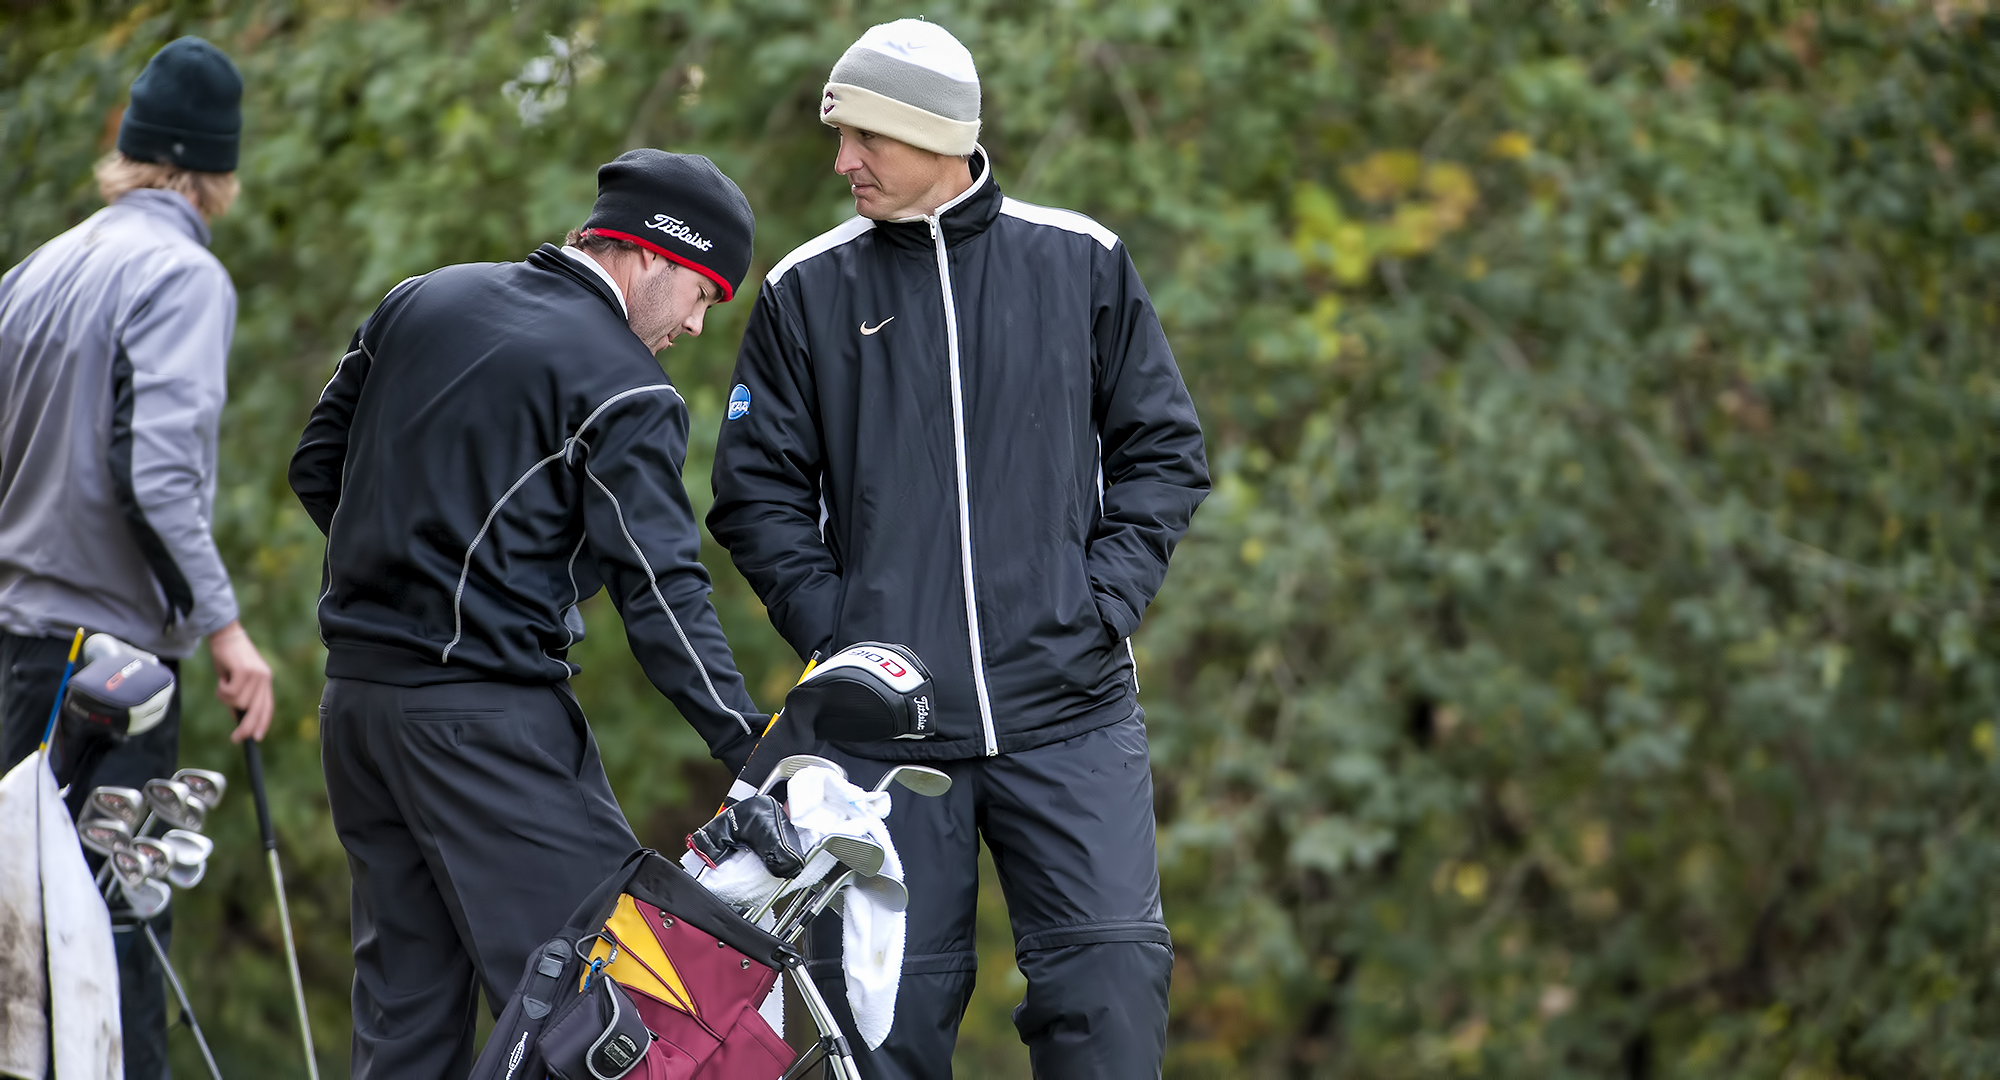 Chris Howe (center) was named the new head coach for the Cobber men's golf program. He has been the assistant coach for the past 10 years.